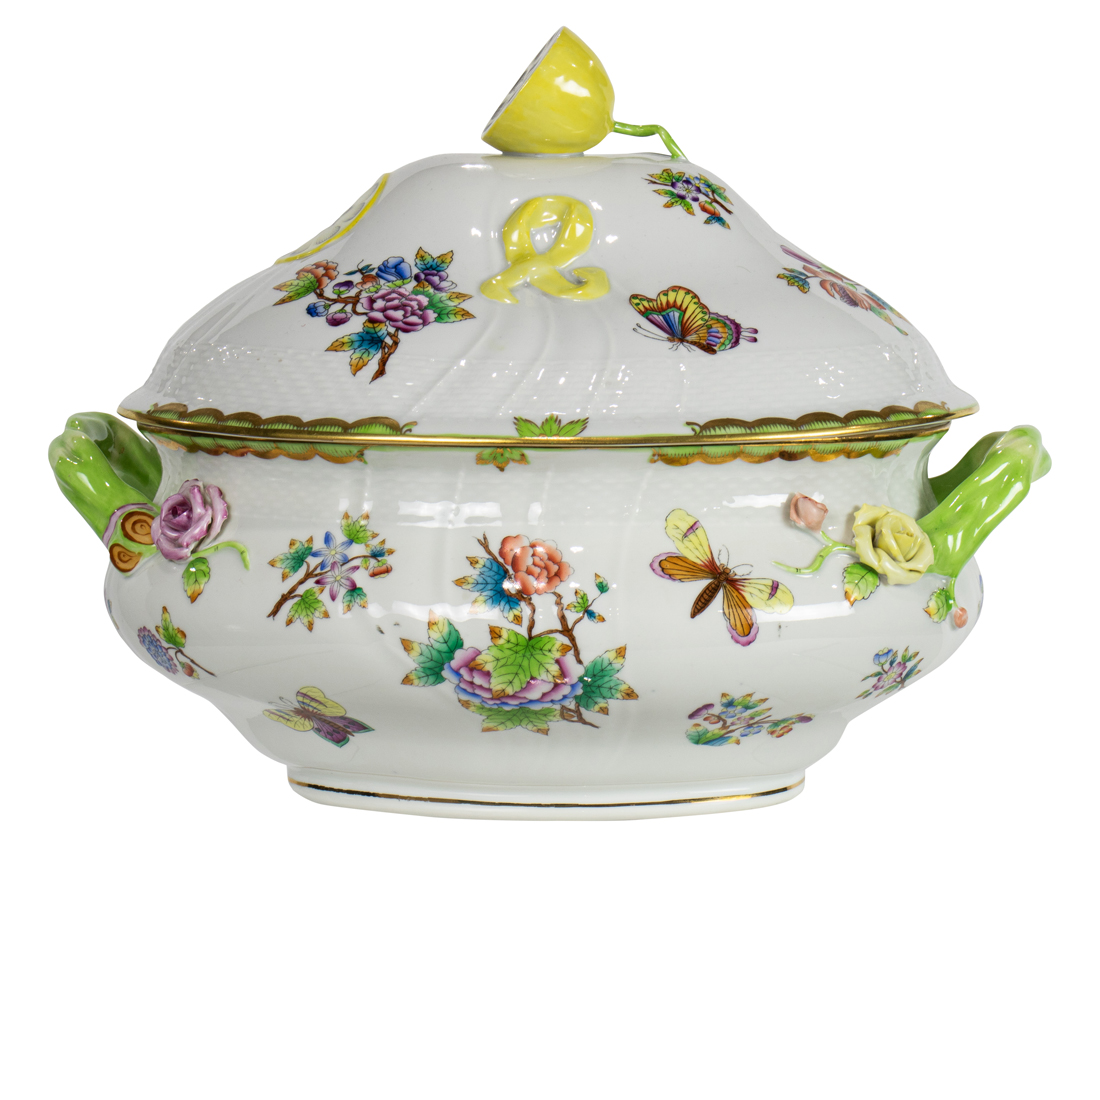 A HEREND PORCELAIN SOUP TUREEN 3a1673